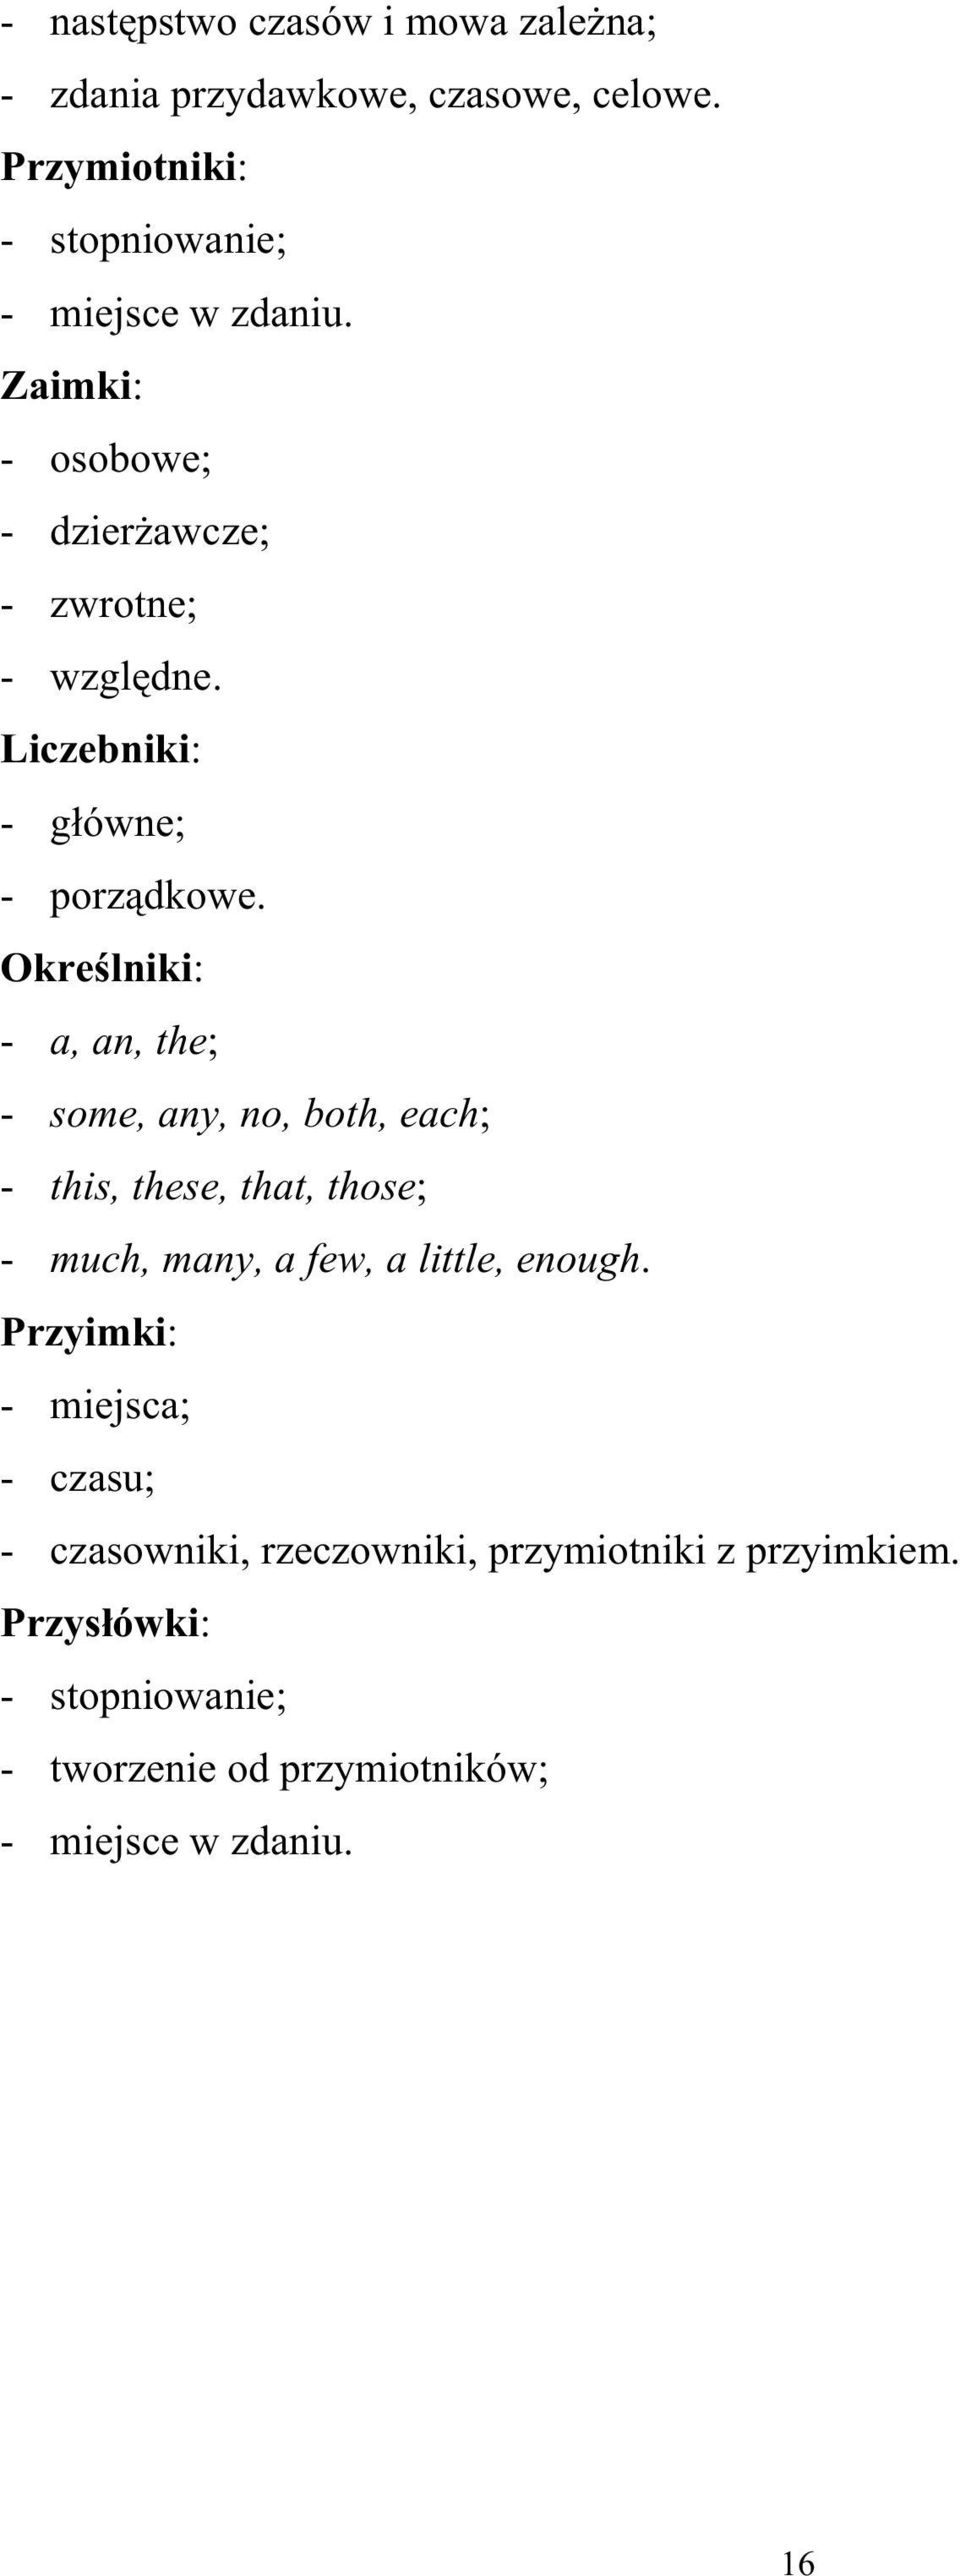 Określniki: - a, an, the; - some, any, no, both, each; - this, these, that, those; - much, many, a few, a little, enough.